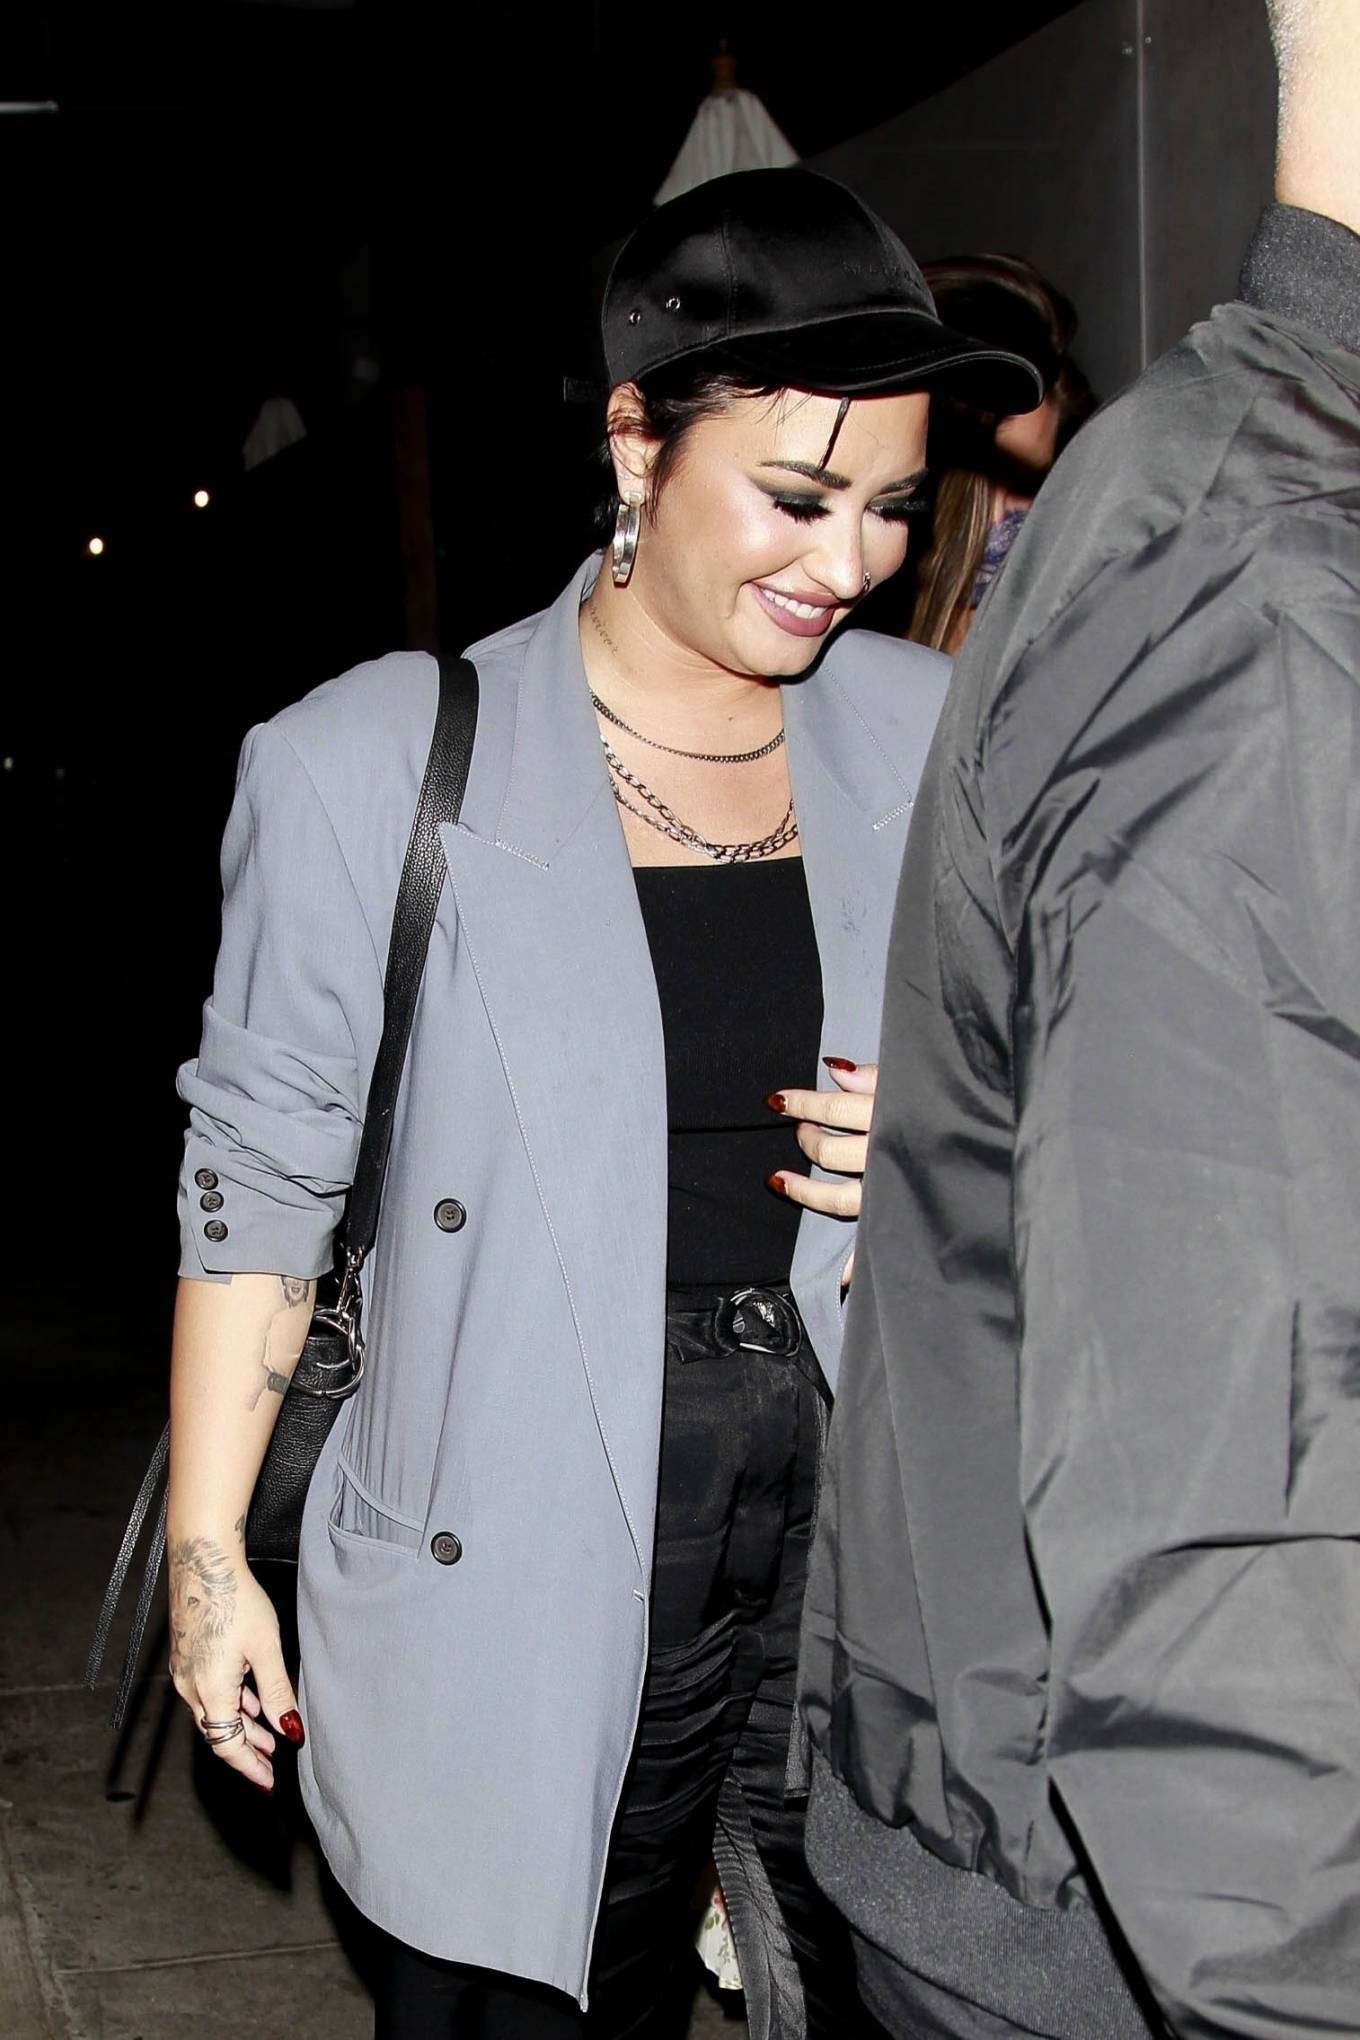 Demi Lovato 2021 : Demi Lovato – Seen with mystery woman as they leave dinner at Craigs in West Hollywood-04